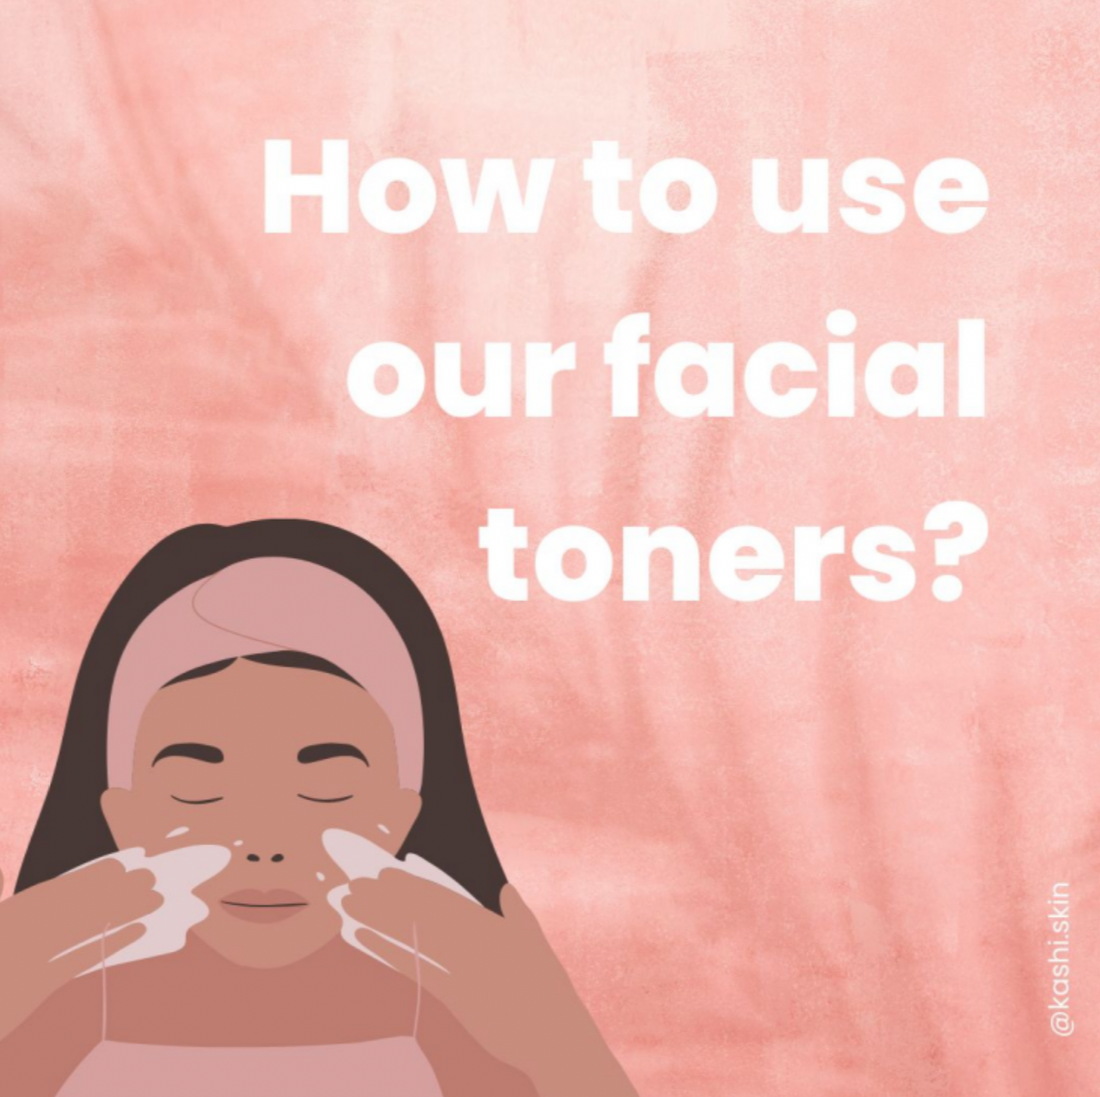 How to Use Our Facial Toners?